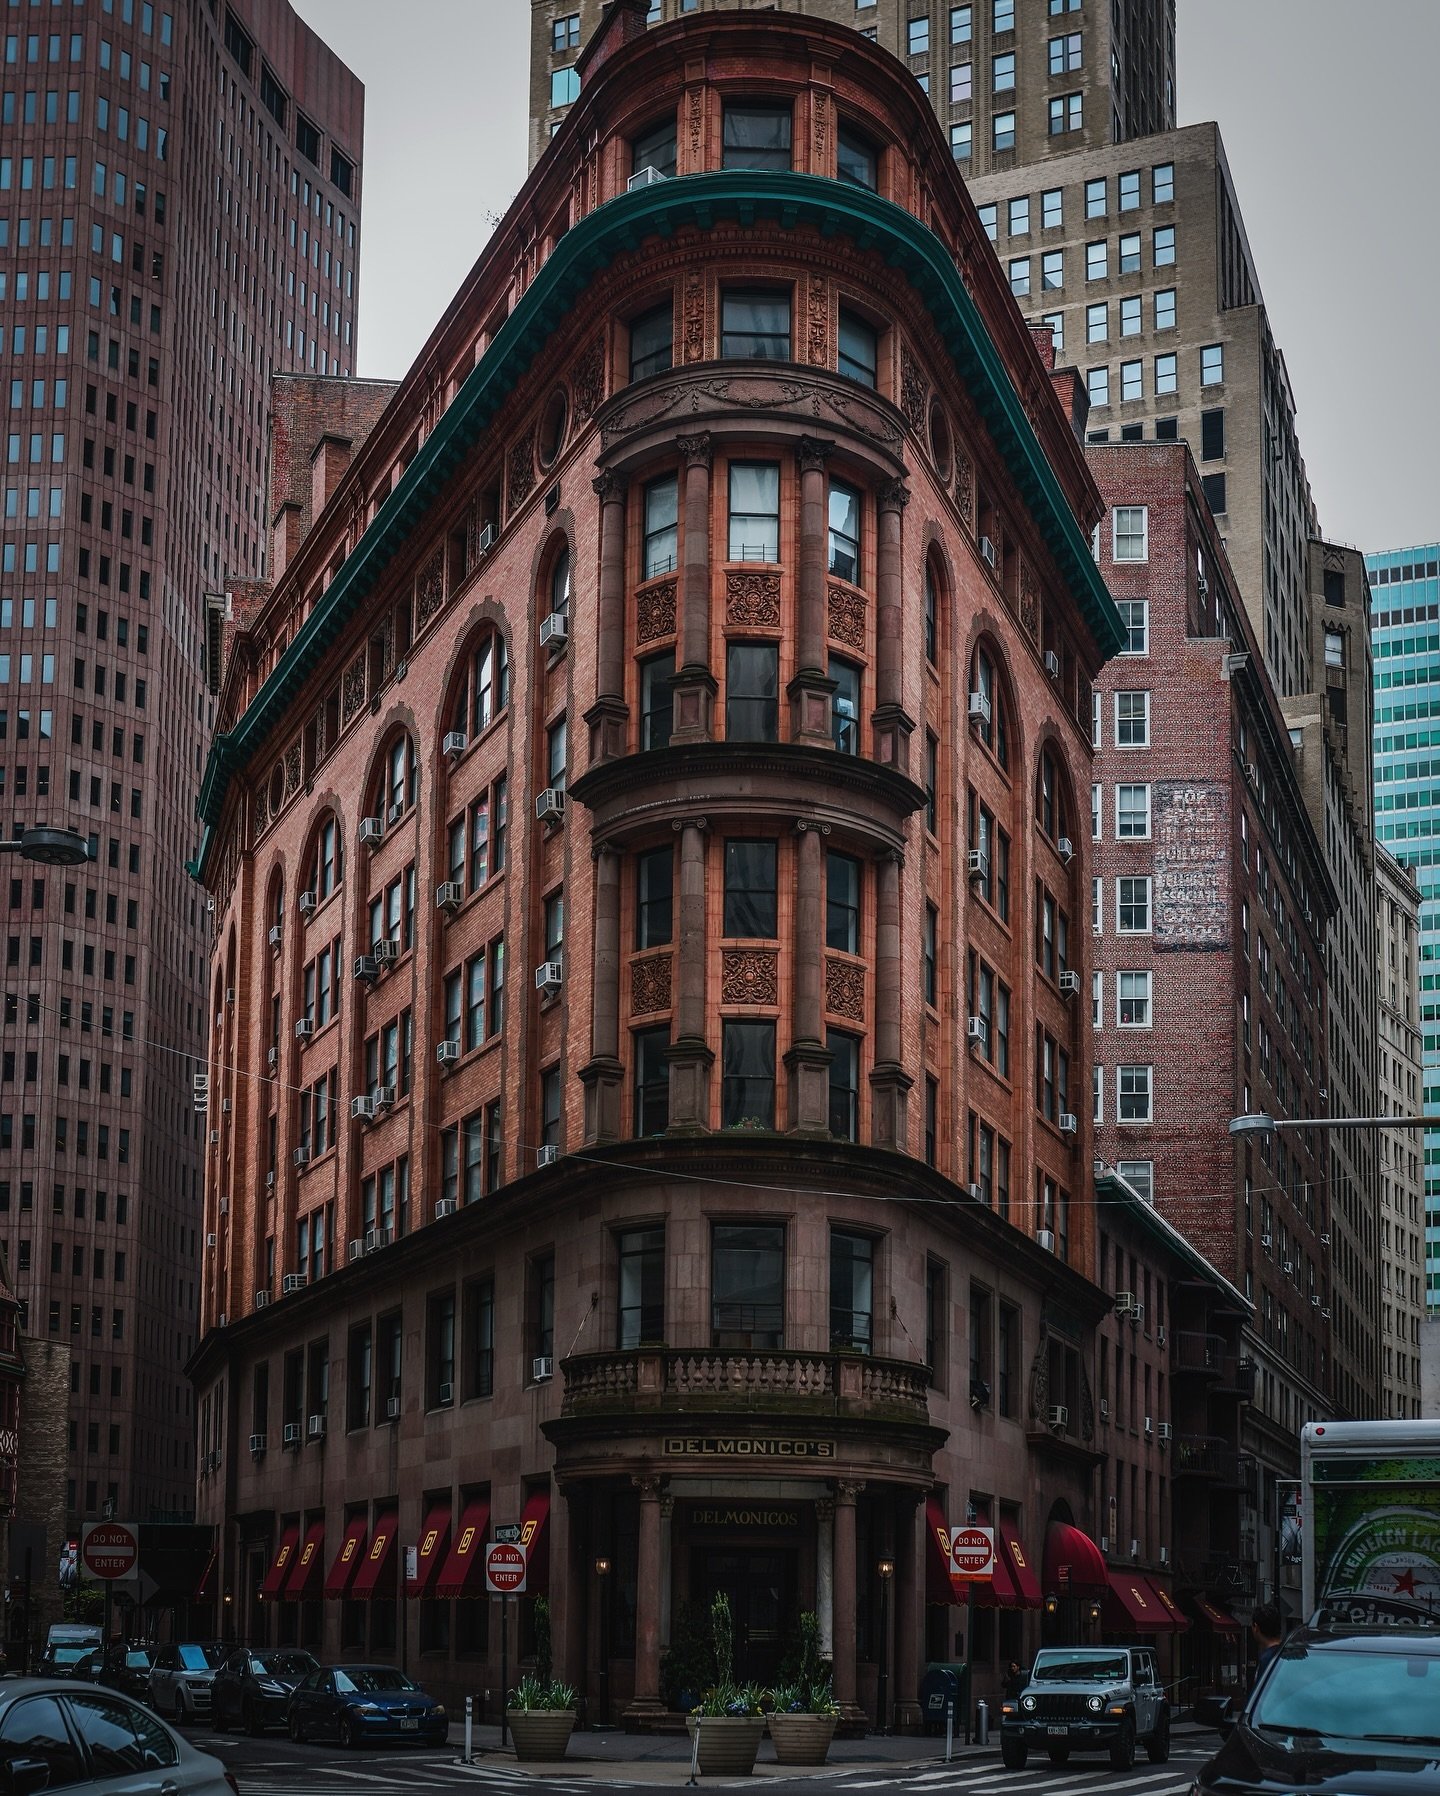 🇺🇸🗽Delmonico&rsquo;s, located in lower Manhattan, NYC, was constructed in the Renaissance Revival style between 1890 and 1891. 😍
&bull;
&bull;
#newyork #newyorkcity #newyorker #newyorklife #newyorknewyork #nyc #nycity #newyorkphotographer #newyor